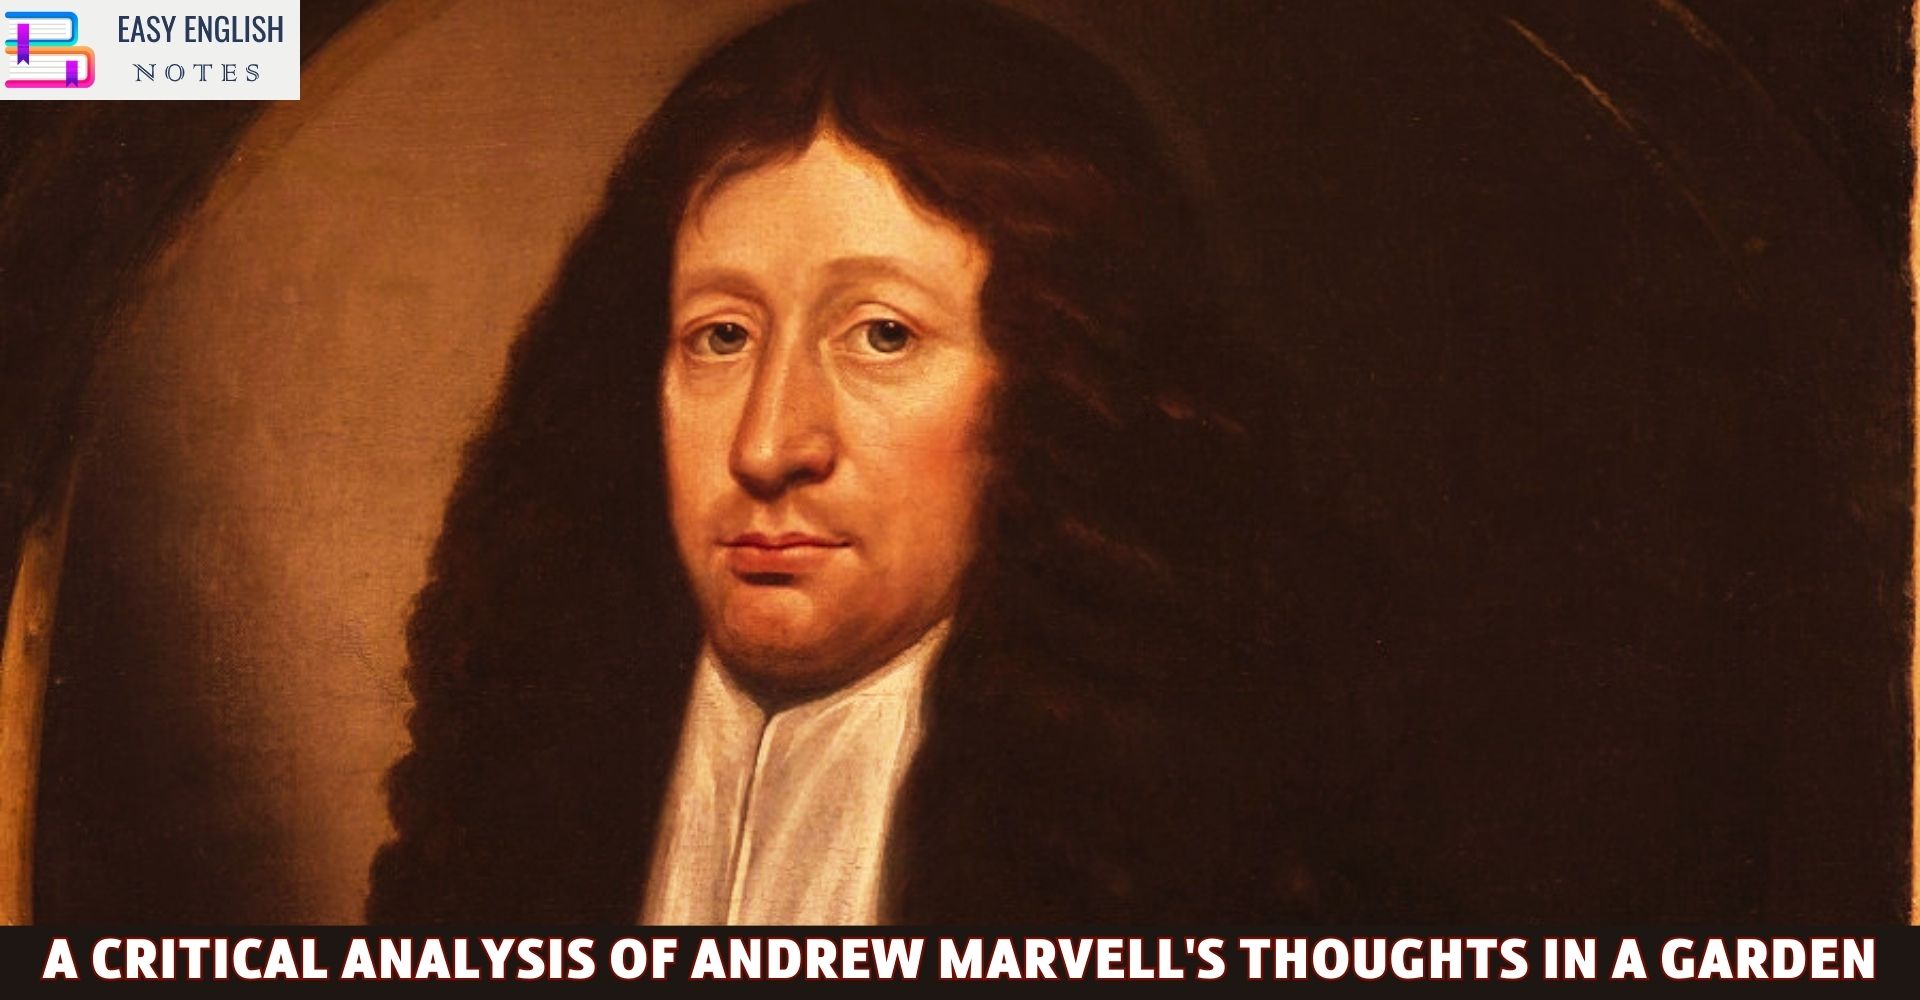 A Critical Analysis of Andrew Marvell's Thoughts in a Garden